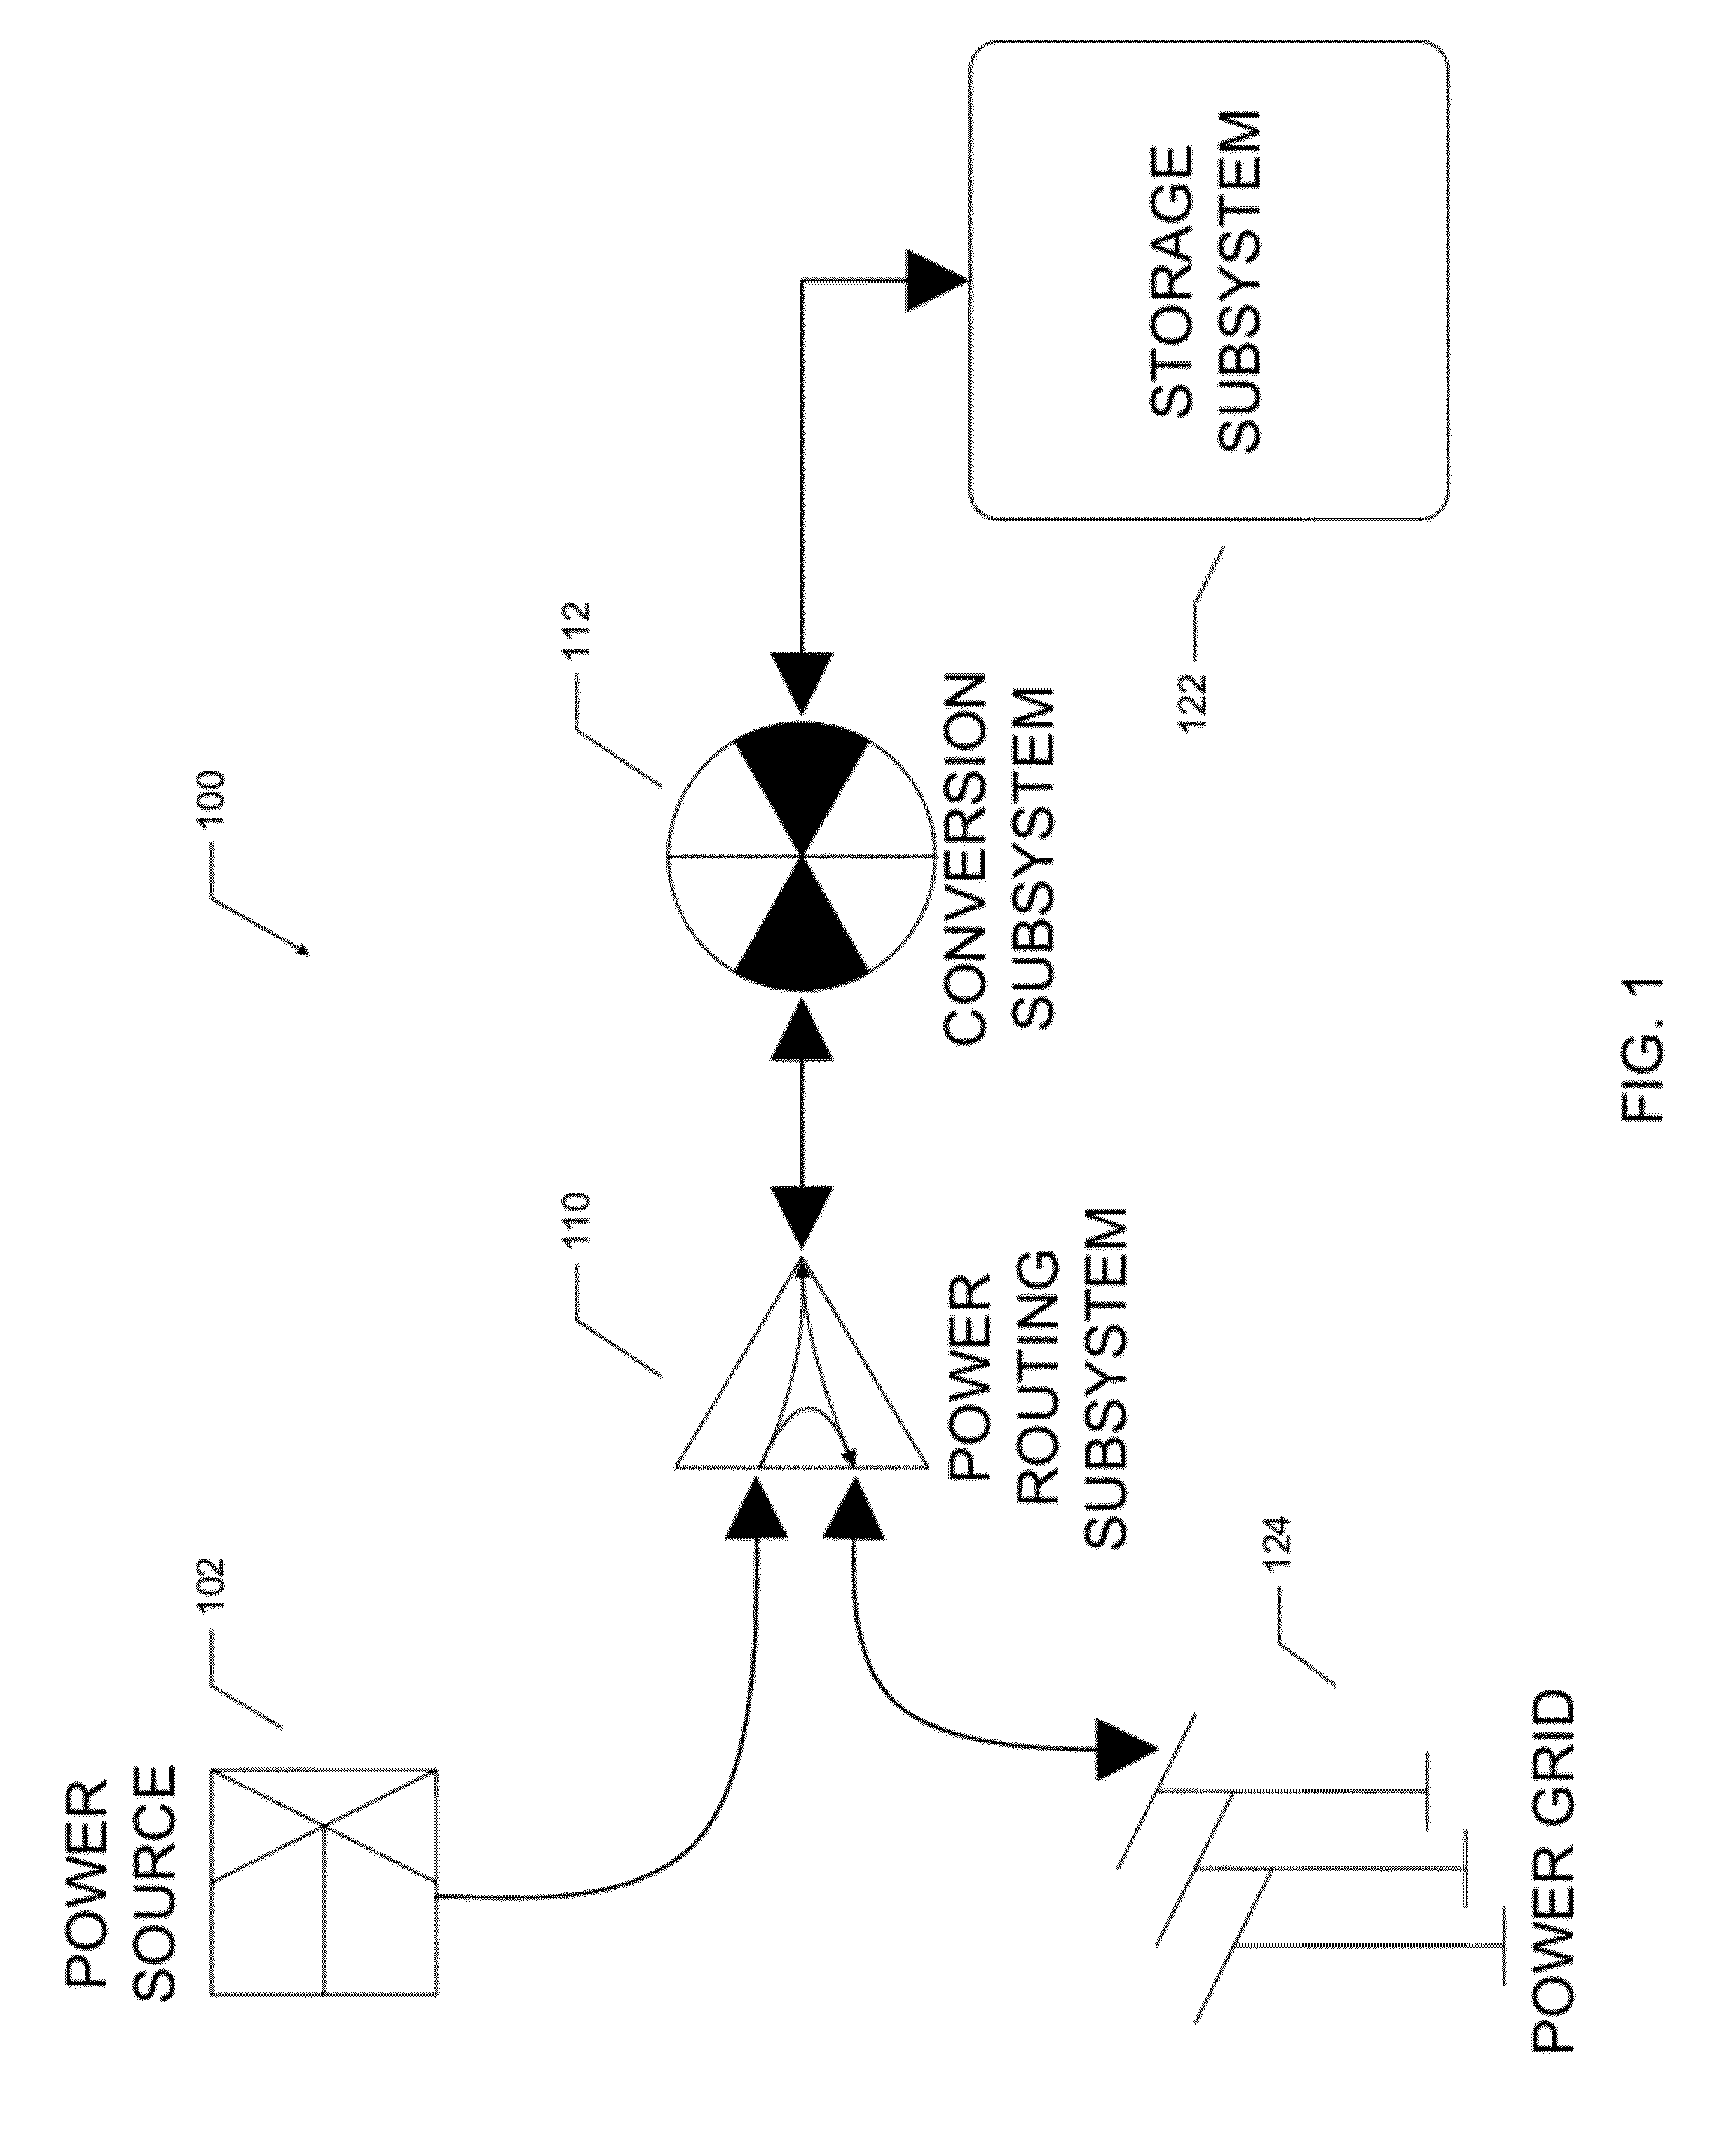 System and method for conserving energy resources through storage and delivery of renewable energy